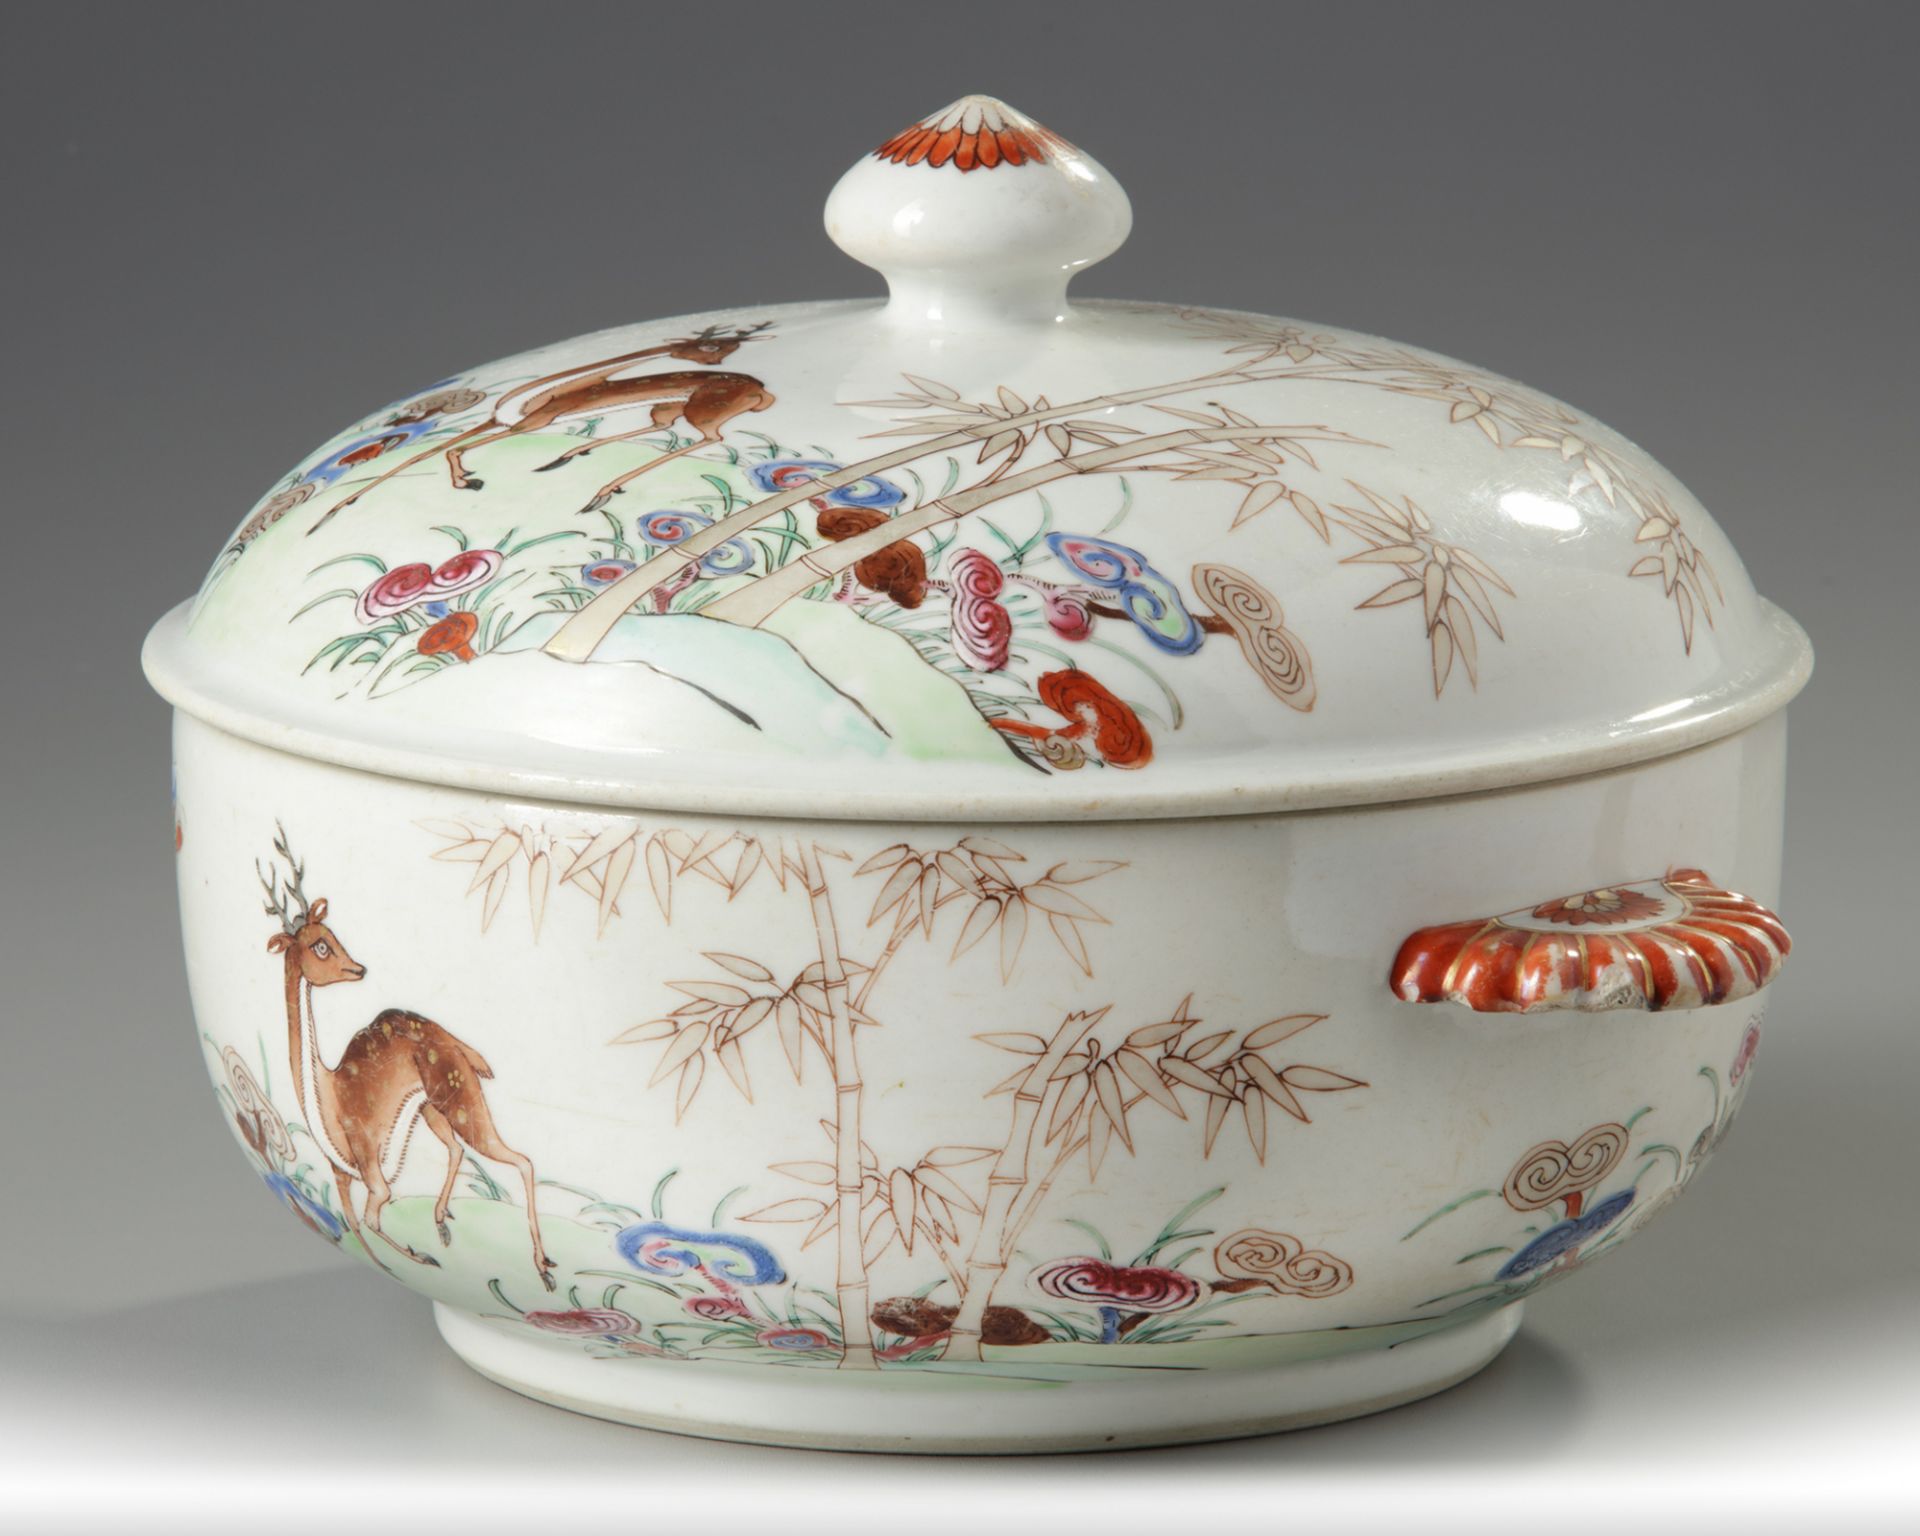 A CHINESE FAMILLE ROSE 'DEER' TUREEN AND COVER, 18TH CENTURY - Image 3 of 5